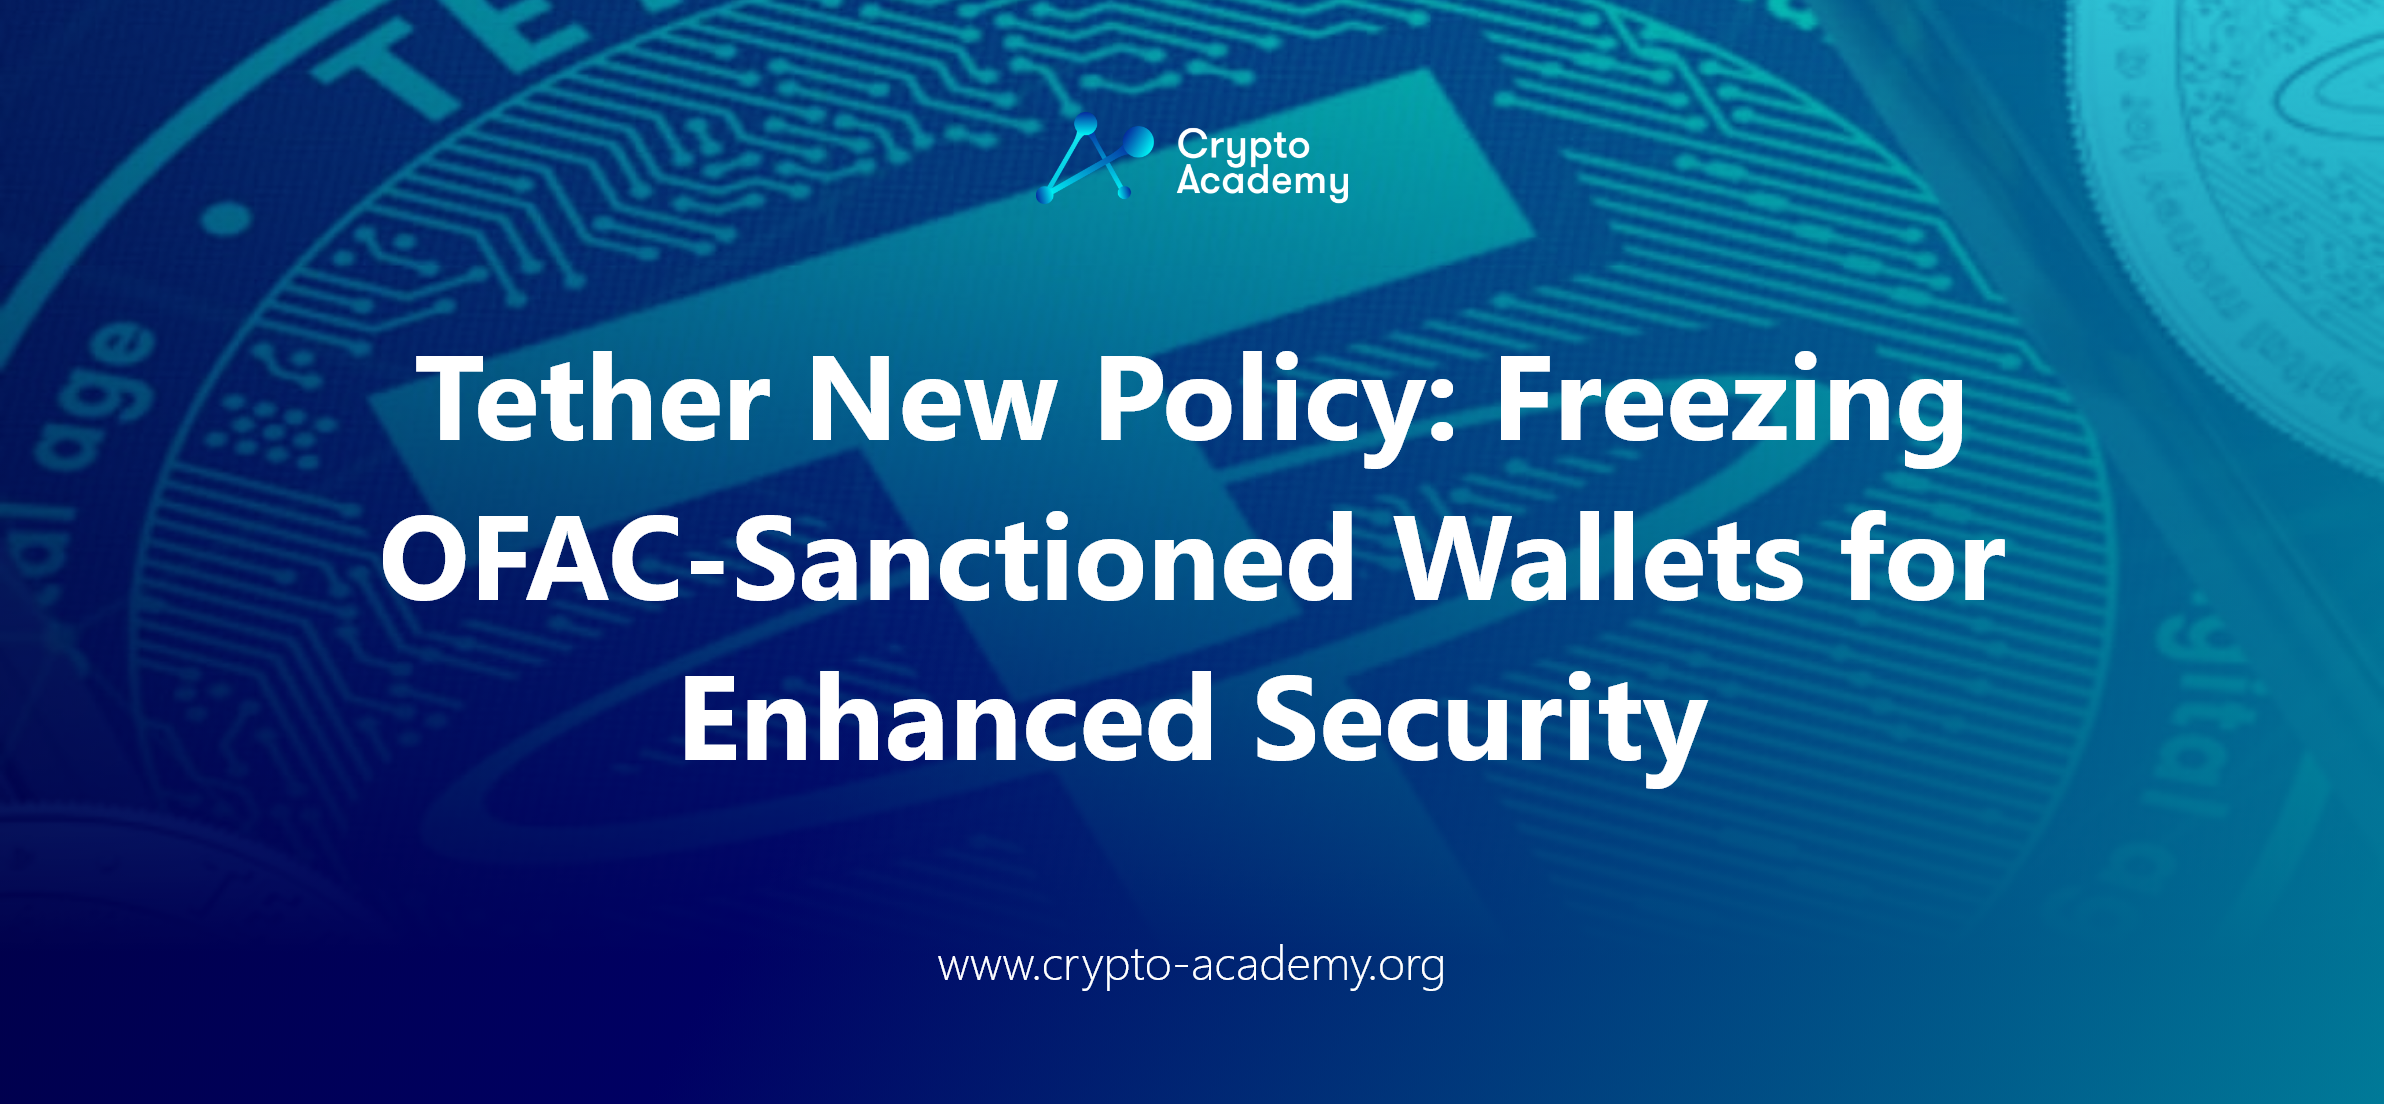 Tether Freezing OFAC-Sanctioned Wallets for Enhanced Security